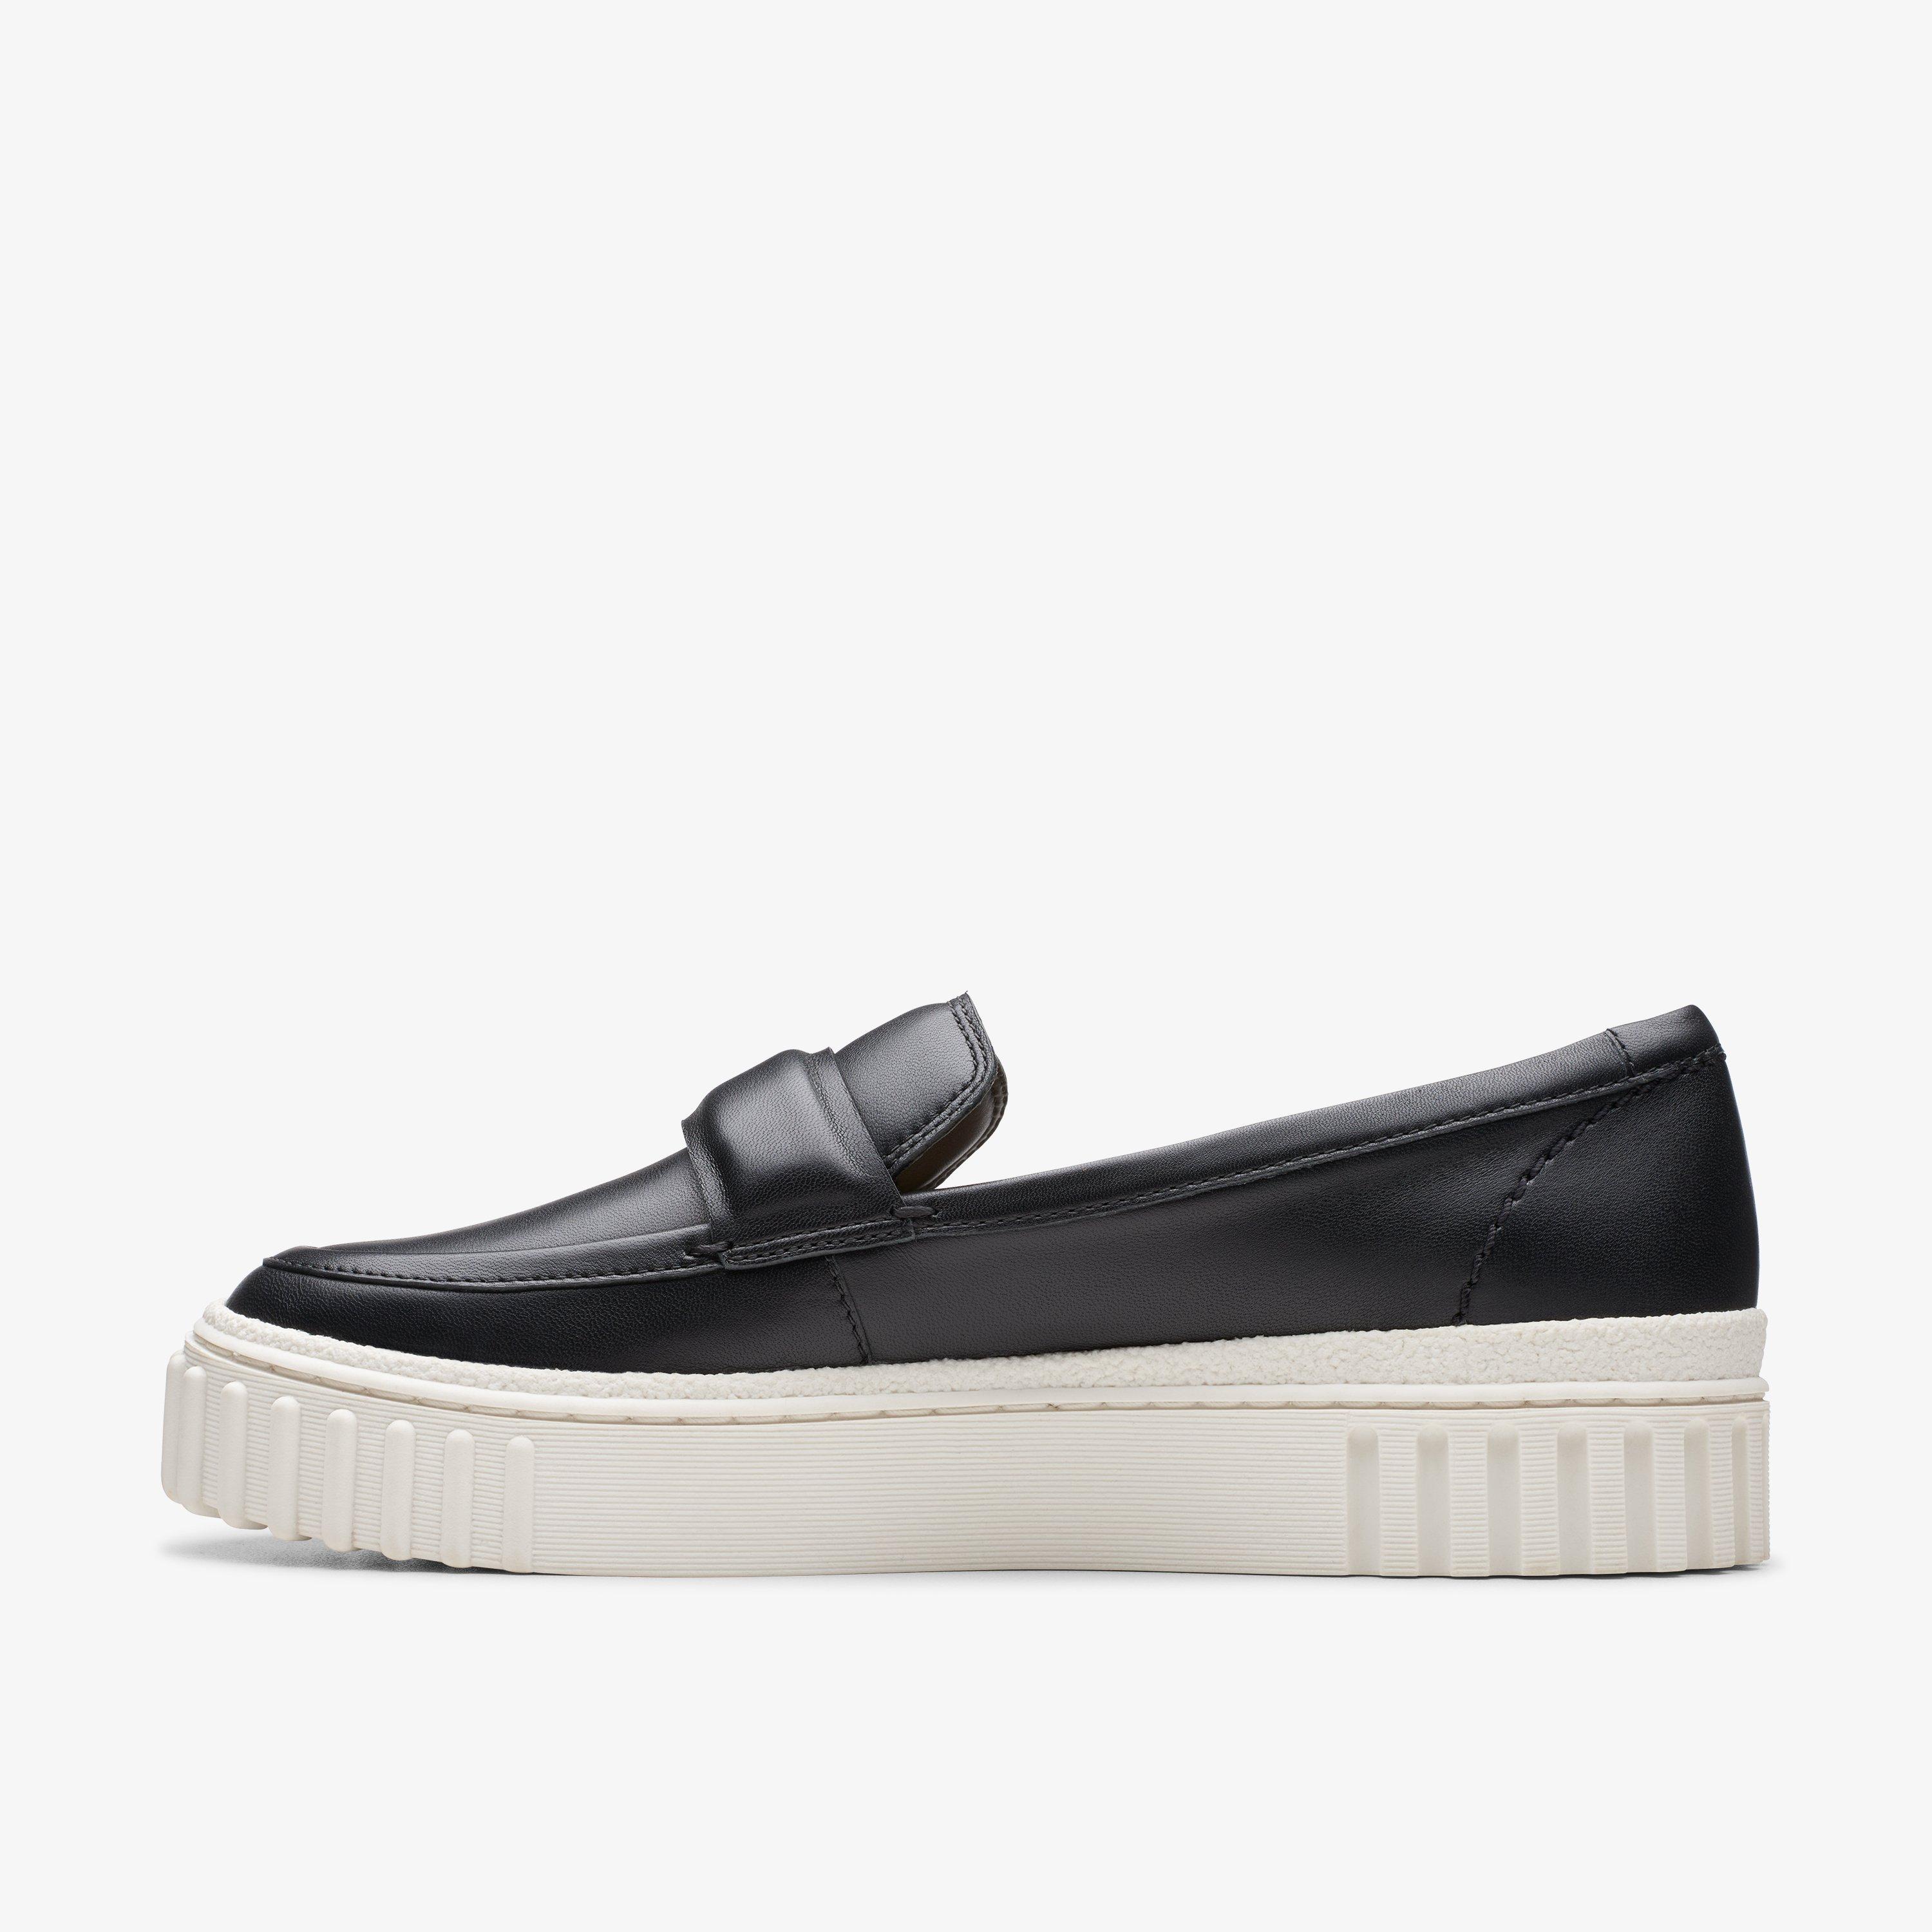 Women's Slip-Ons - Leather Slip-On Shoes & Sandals